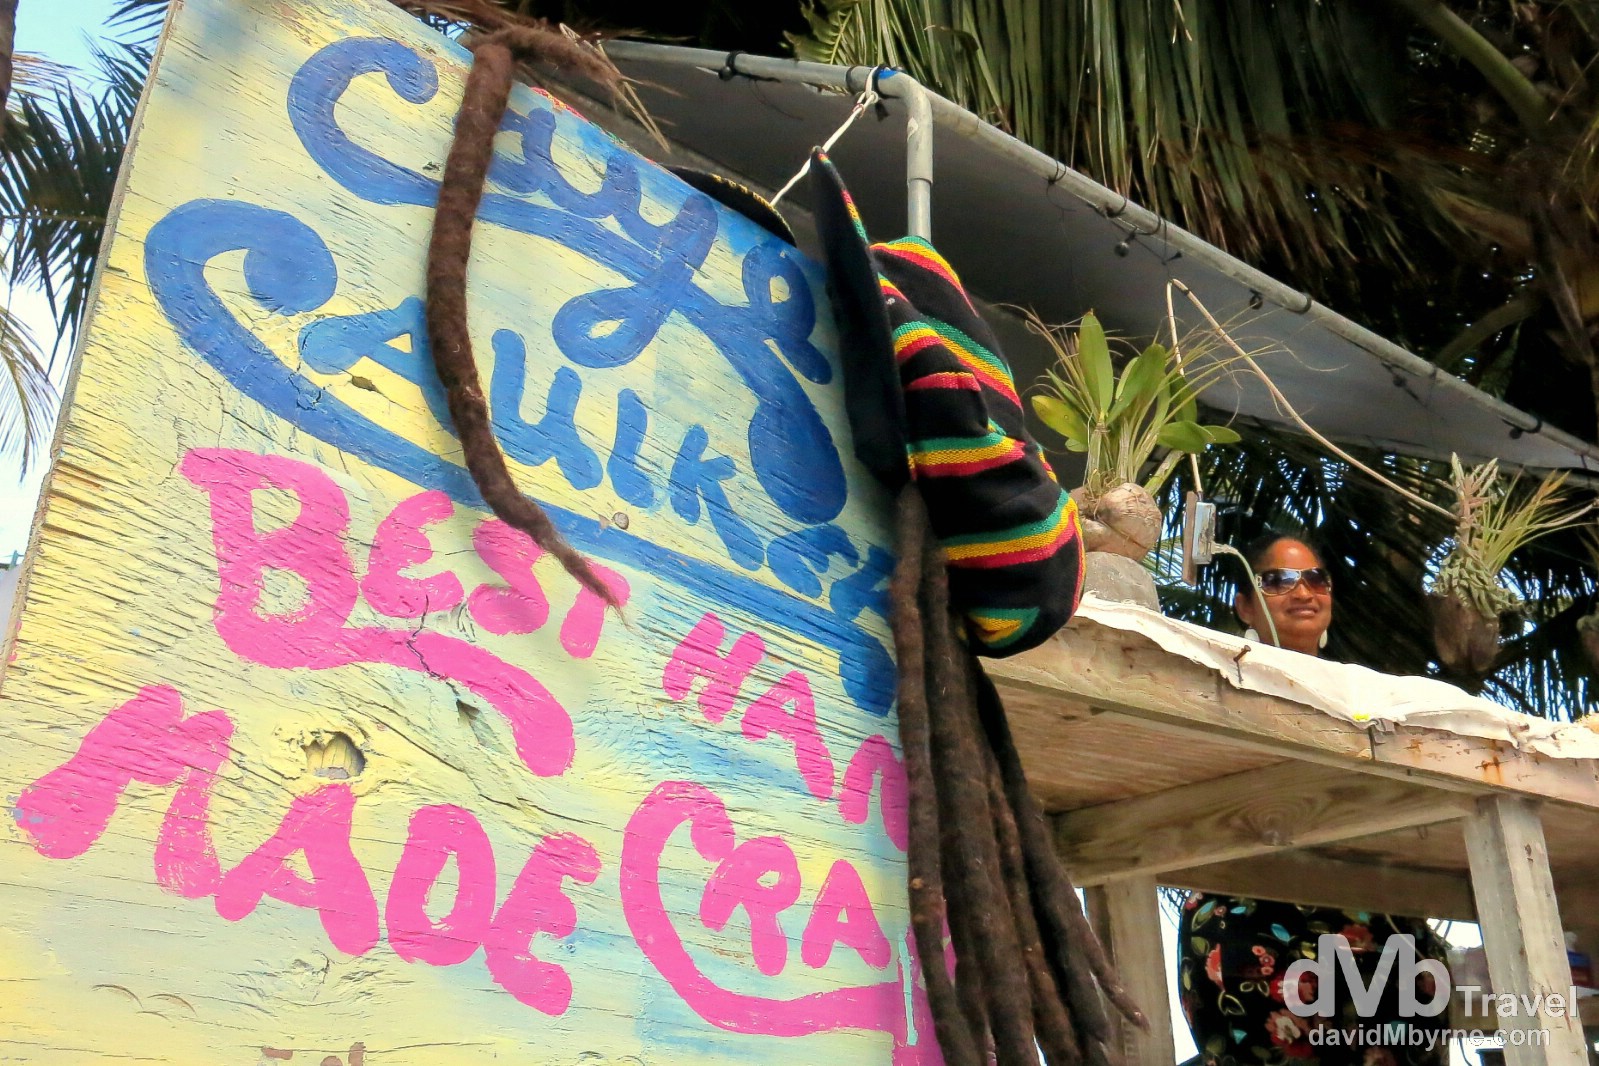 I need not have packed mine. Ready-made Bob Marley hat & dreds. Caye Caulker, Belize. May 13th 2013.